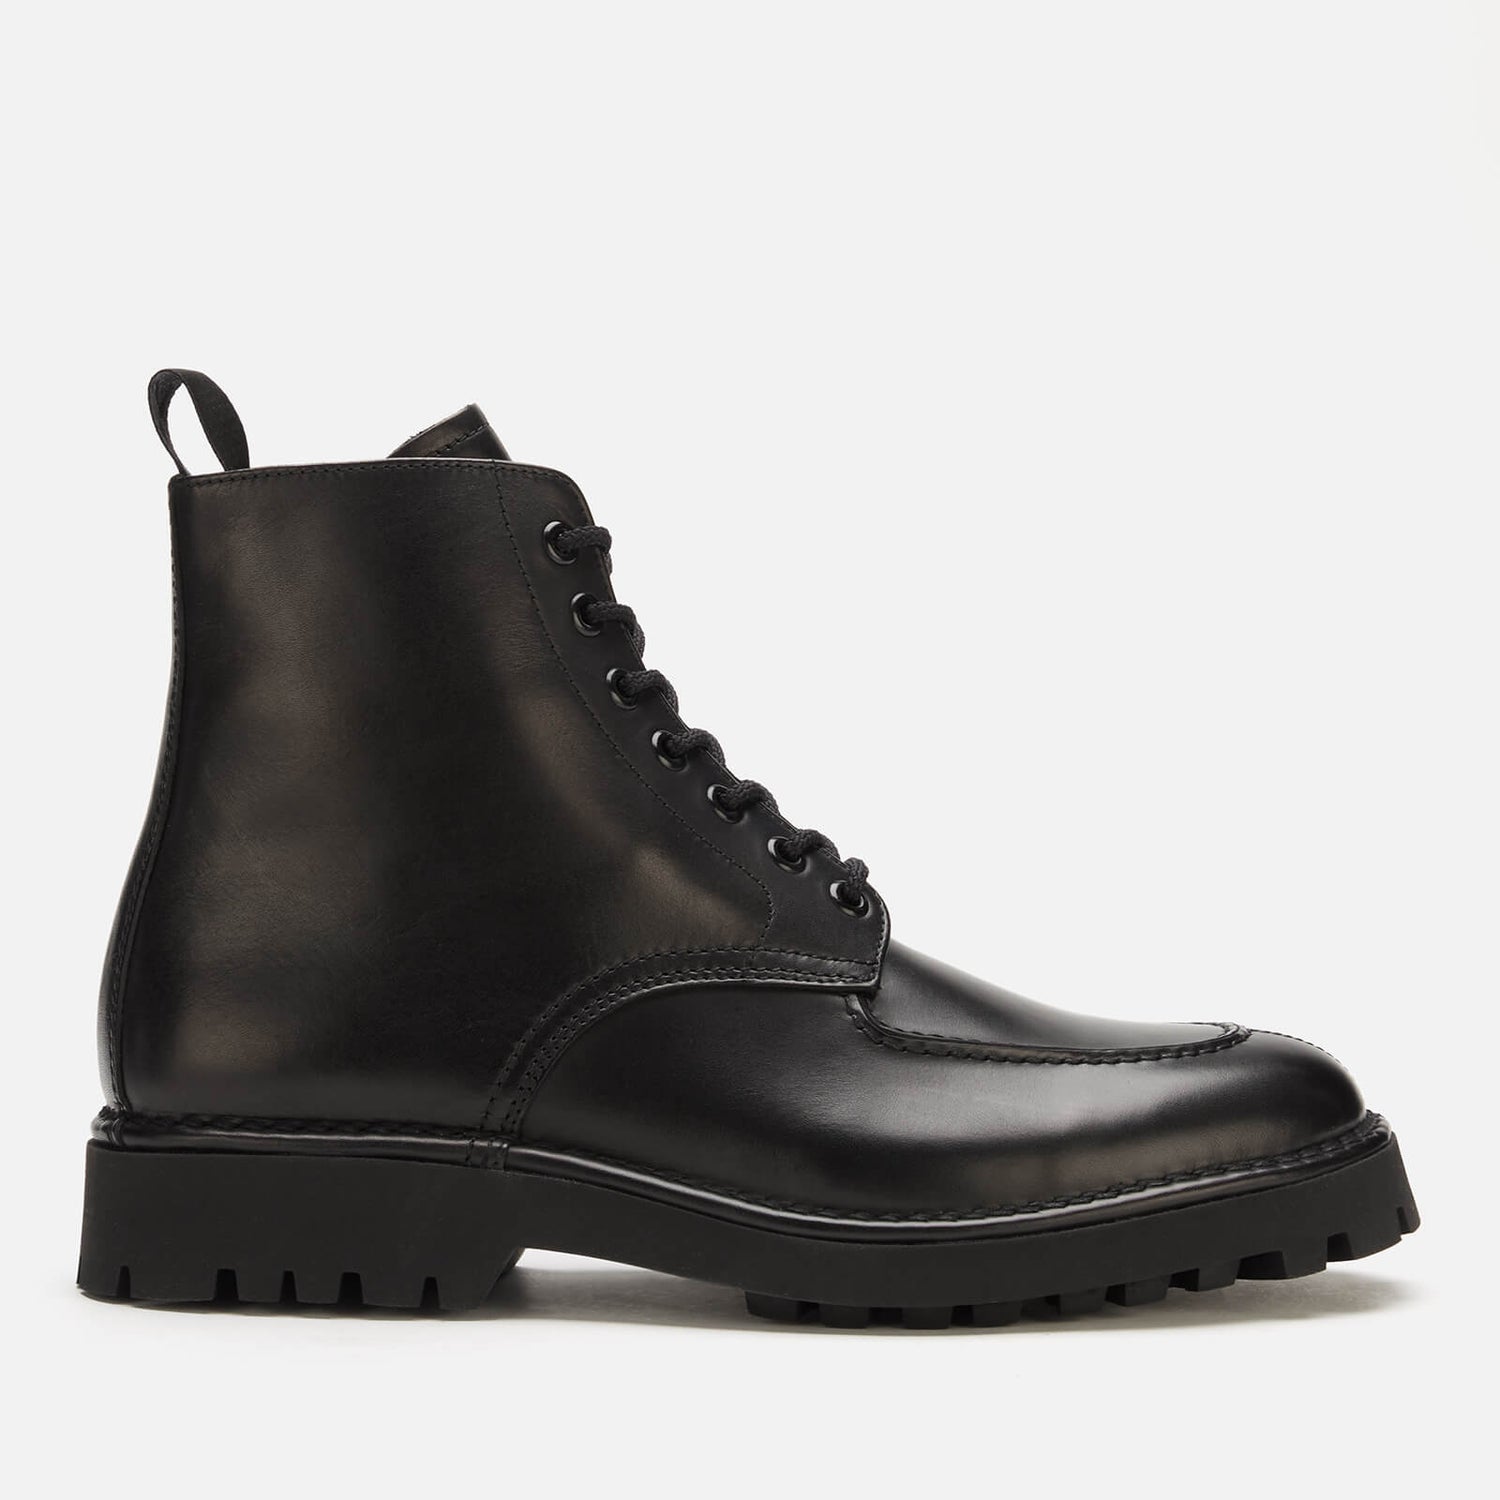 KENZO Men's K-Mount Leather Lace Up Boots - Black